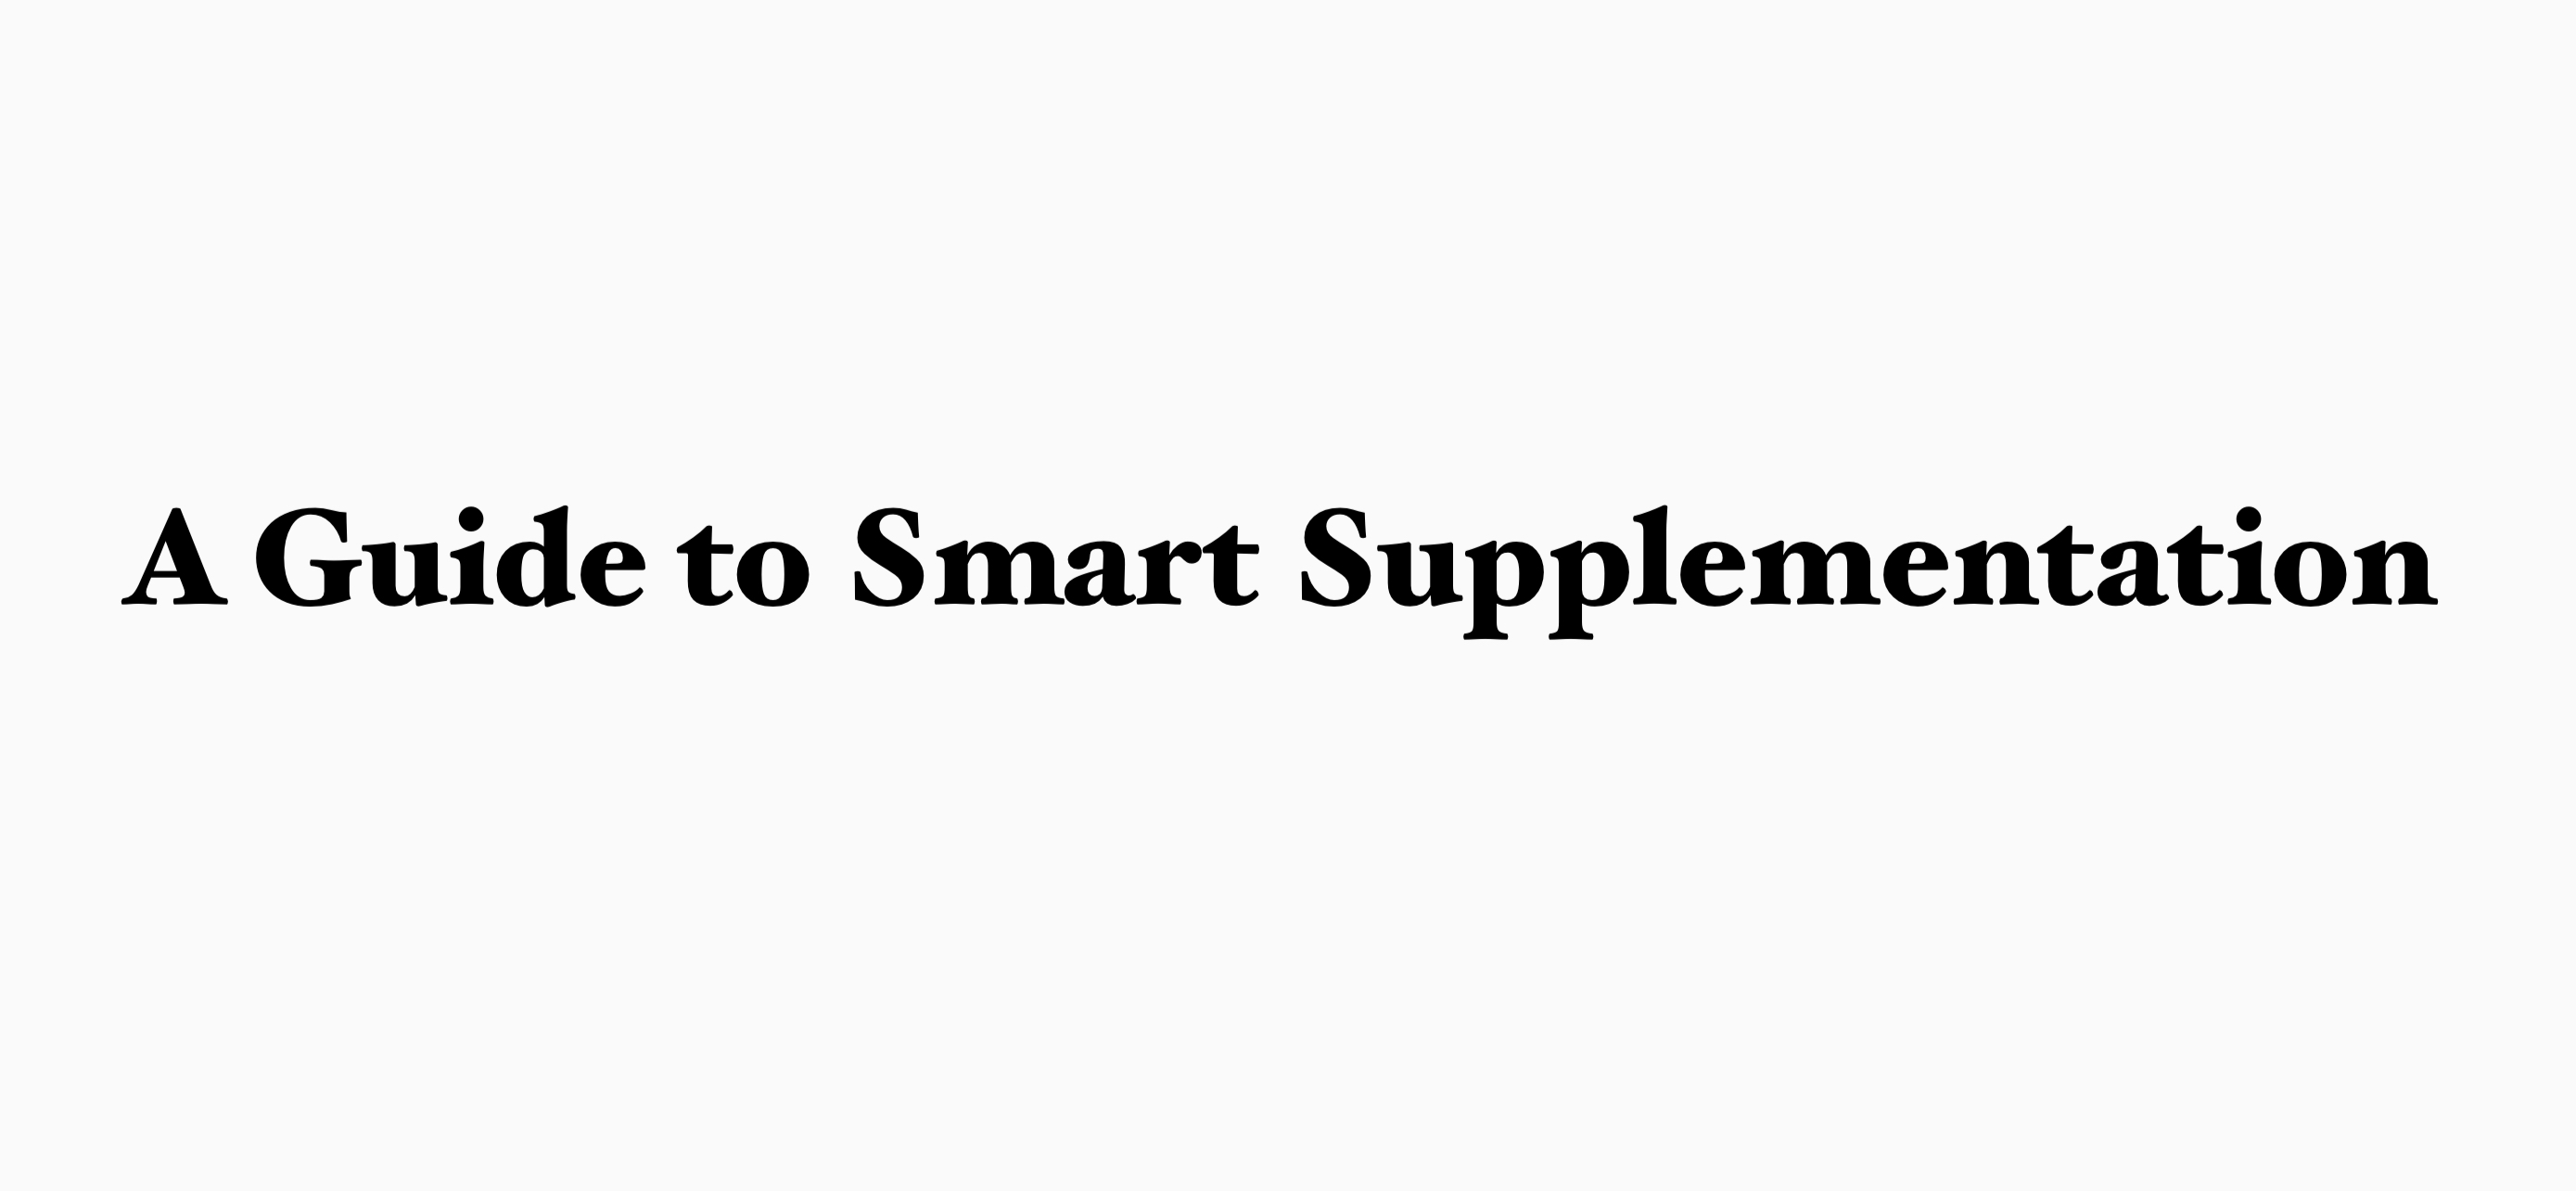 A GUIDE TO SMART SUPPLEMENTATION